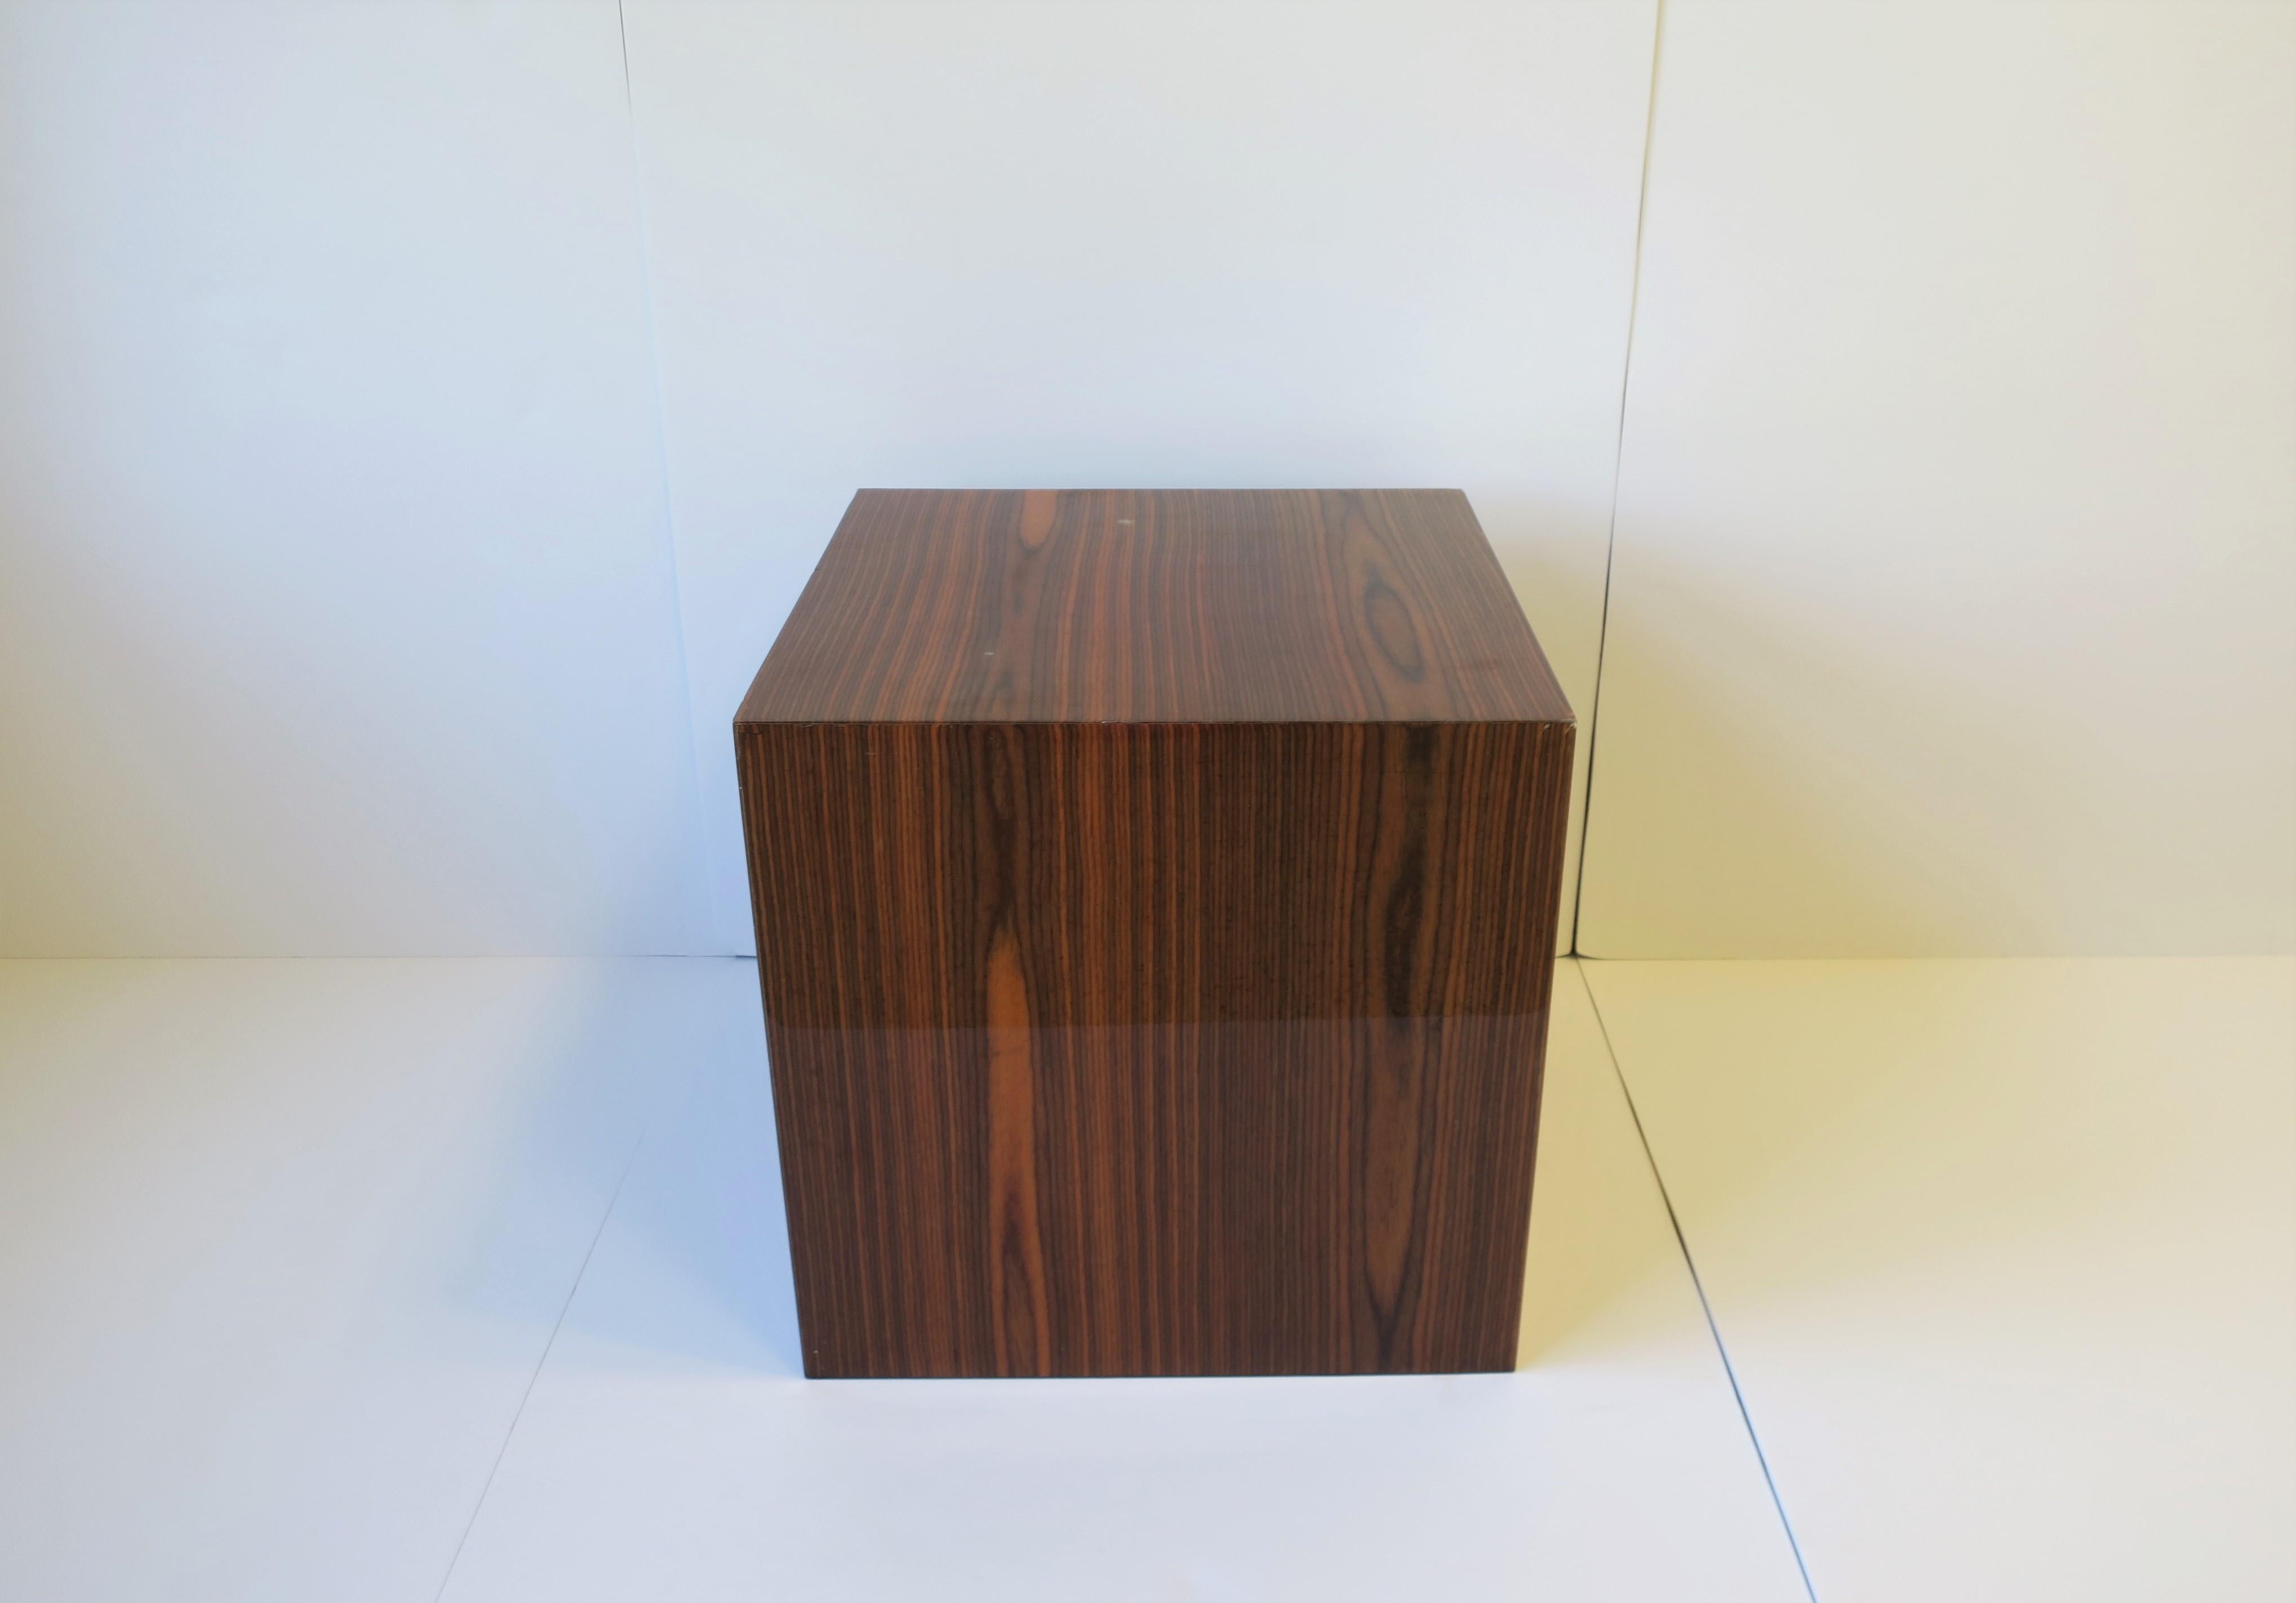 A wood and acrylic pedestal table, circa 21st century. Table is veneered in a rich brown wood and coated with clear acrylic. Great as end table, nightstand table, or to hold/display sculpture, drinks table, etc. Dimensions: 18